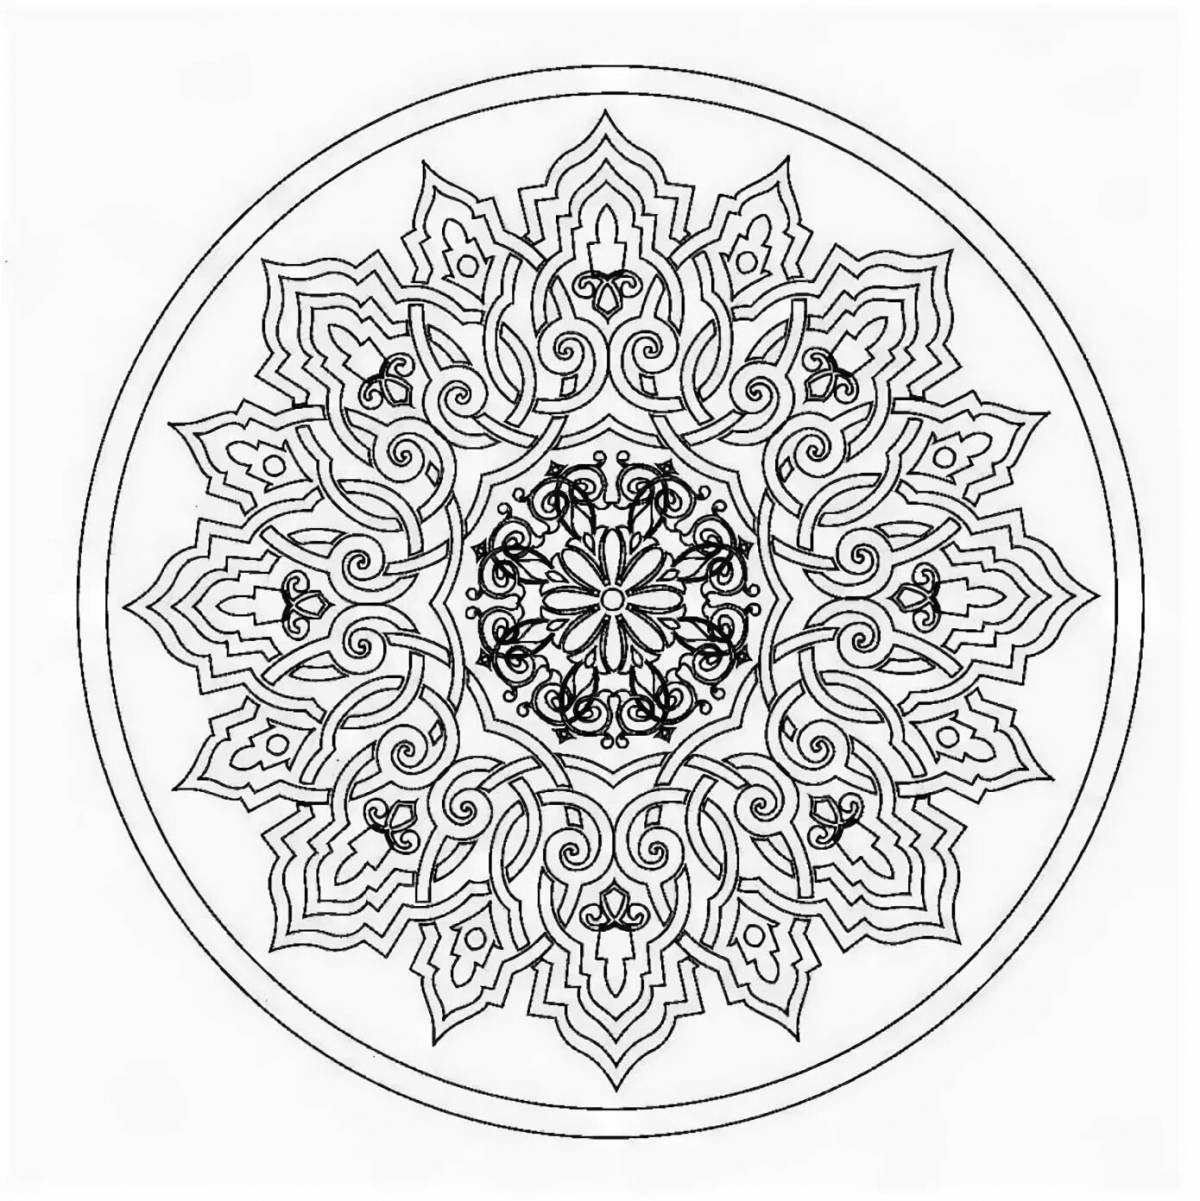 Exquisite coloring mandala meaning